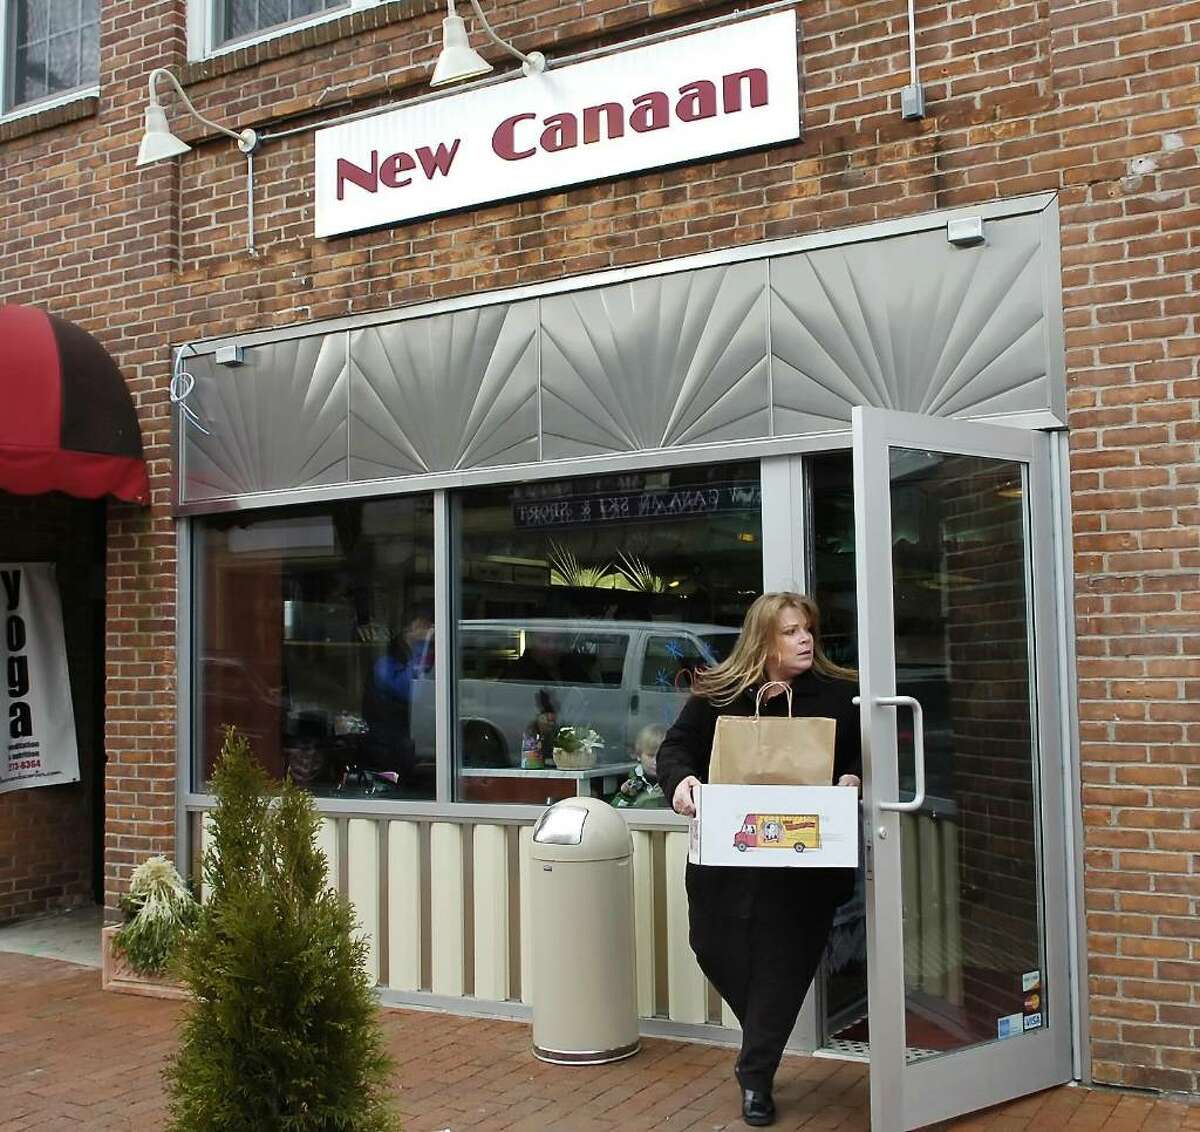 New Canaan Diner in New Canaan